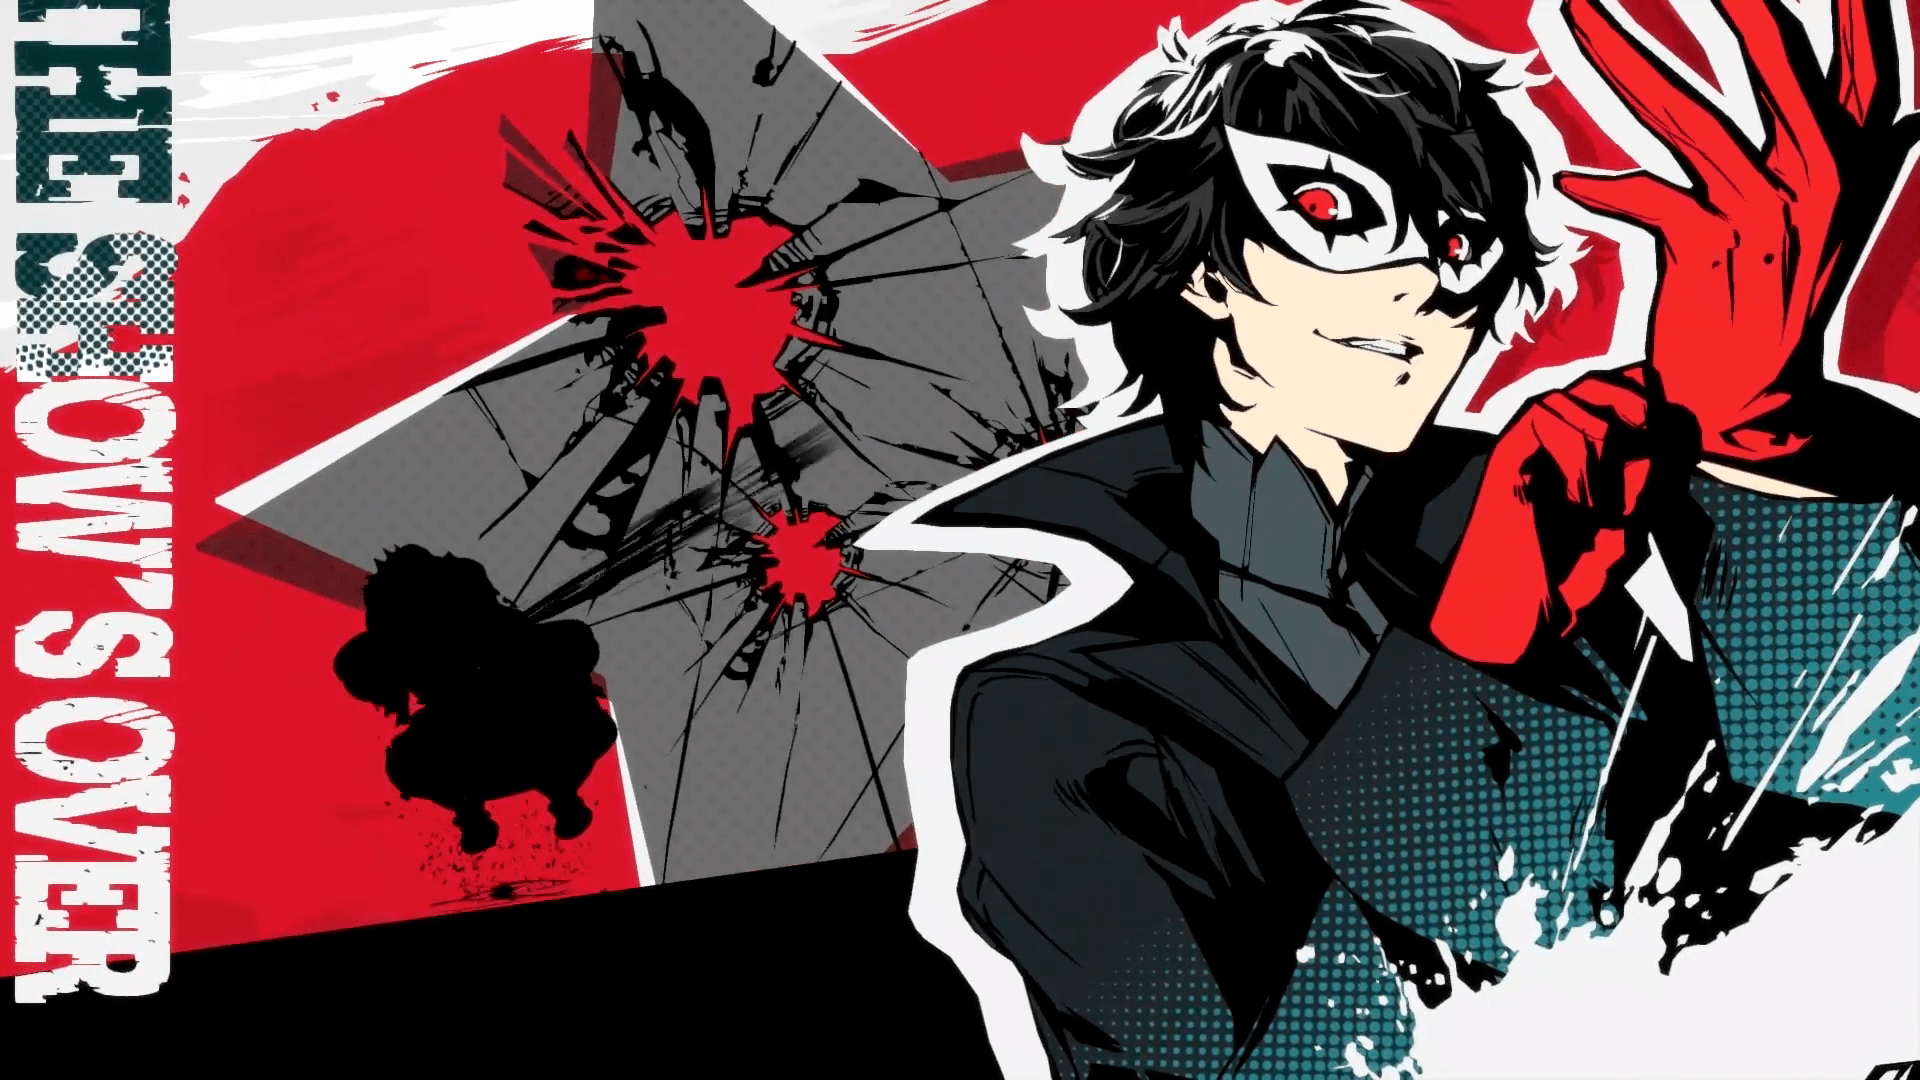 Persona 5 Review - Take Your Time | Marooners' Rock